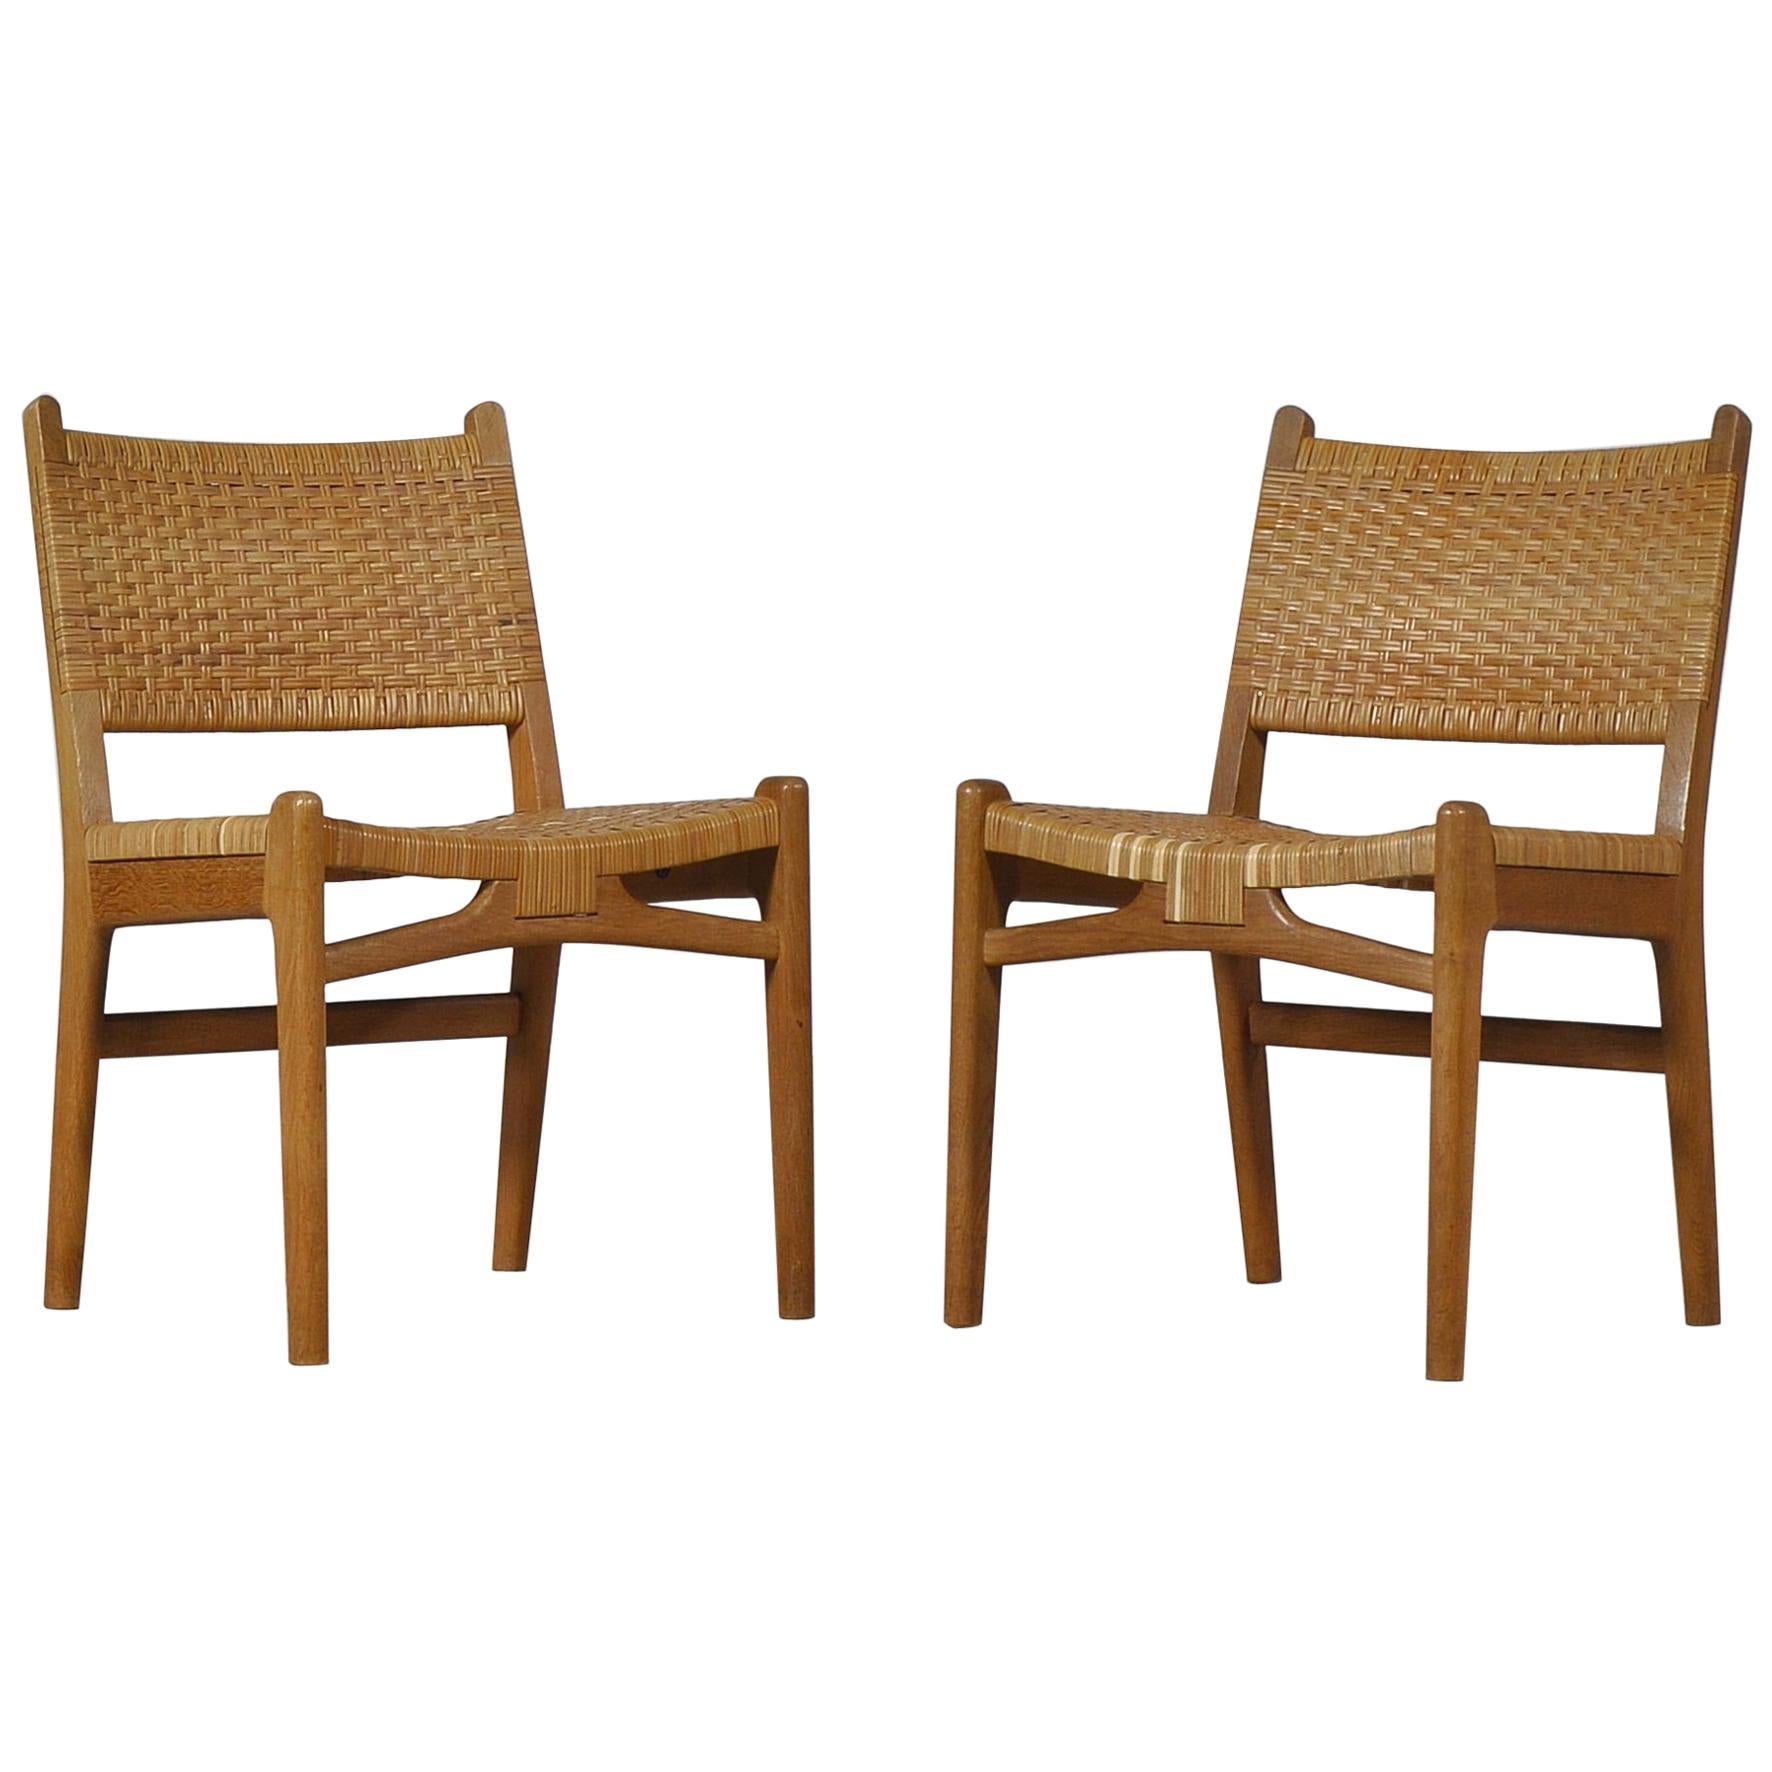 Pair of Oak and Rattan Danish Modern Side Chairs CH31 by Hans J. Wegner, 1950s